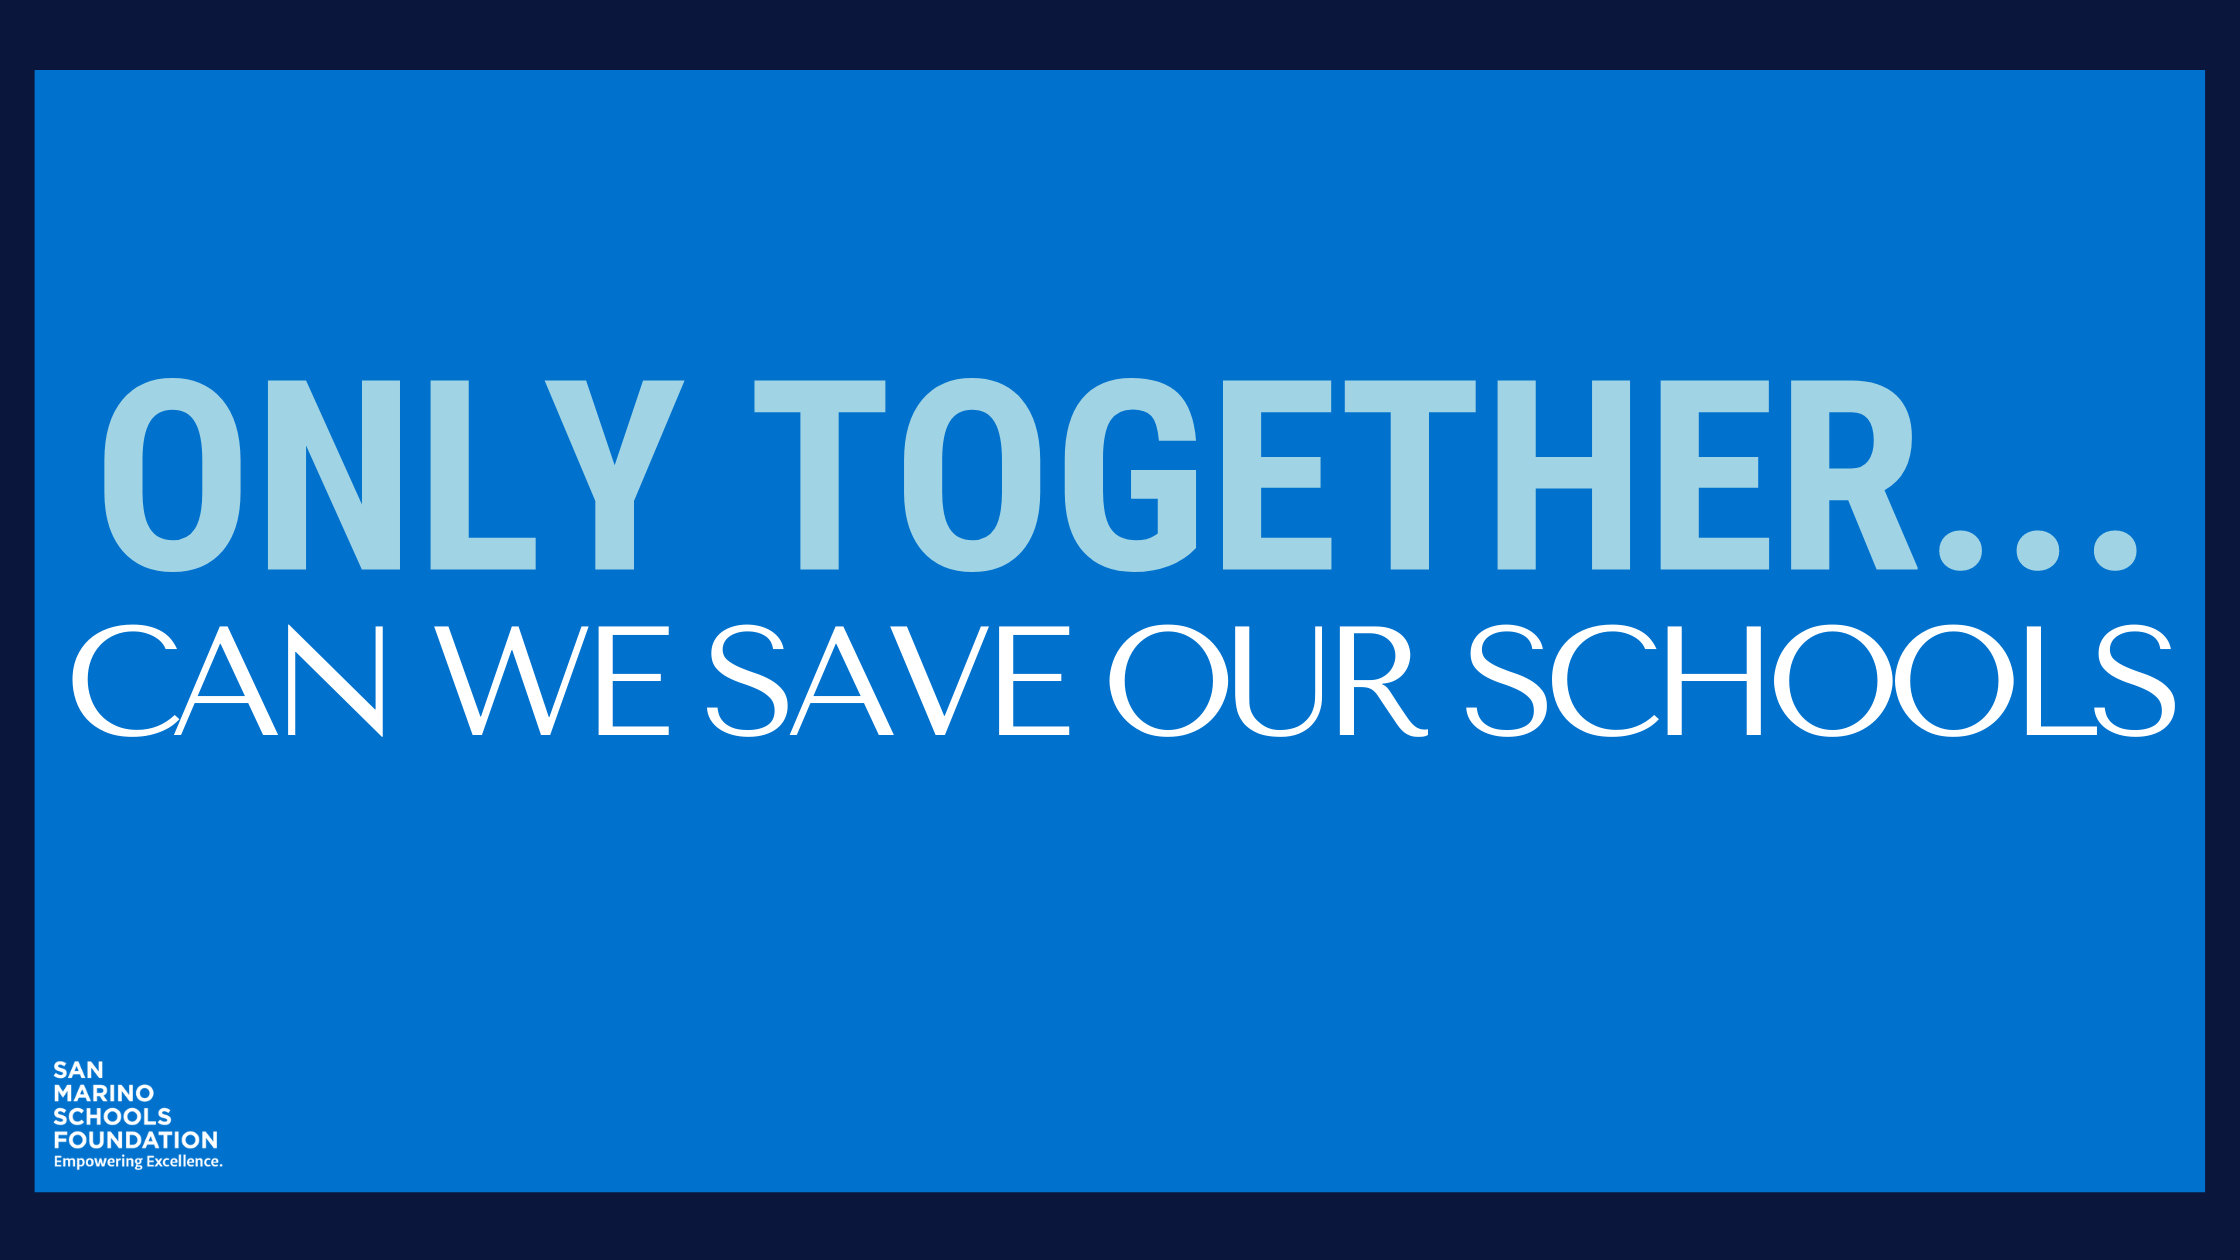 ONLY TOGETHER...can we save our schools!